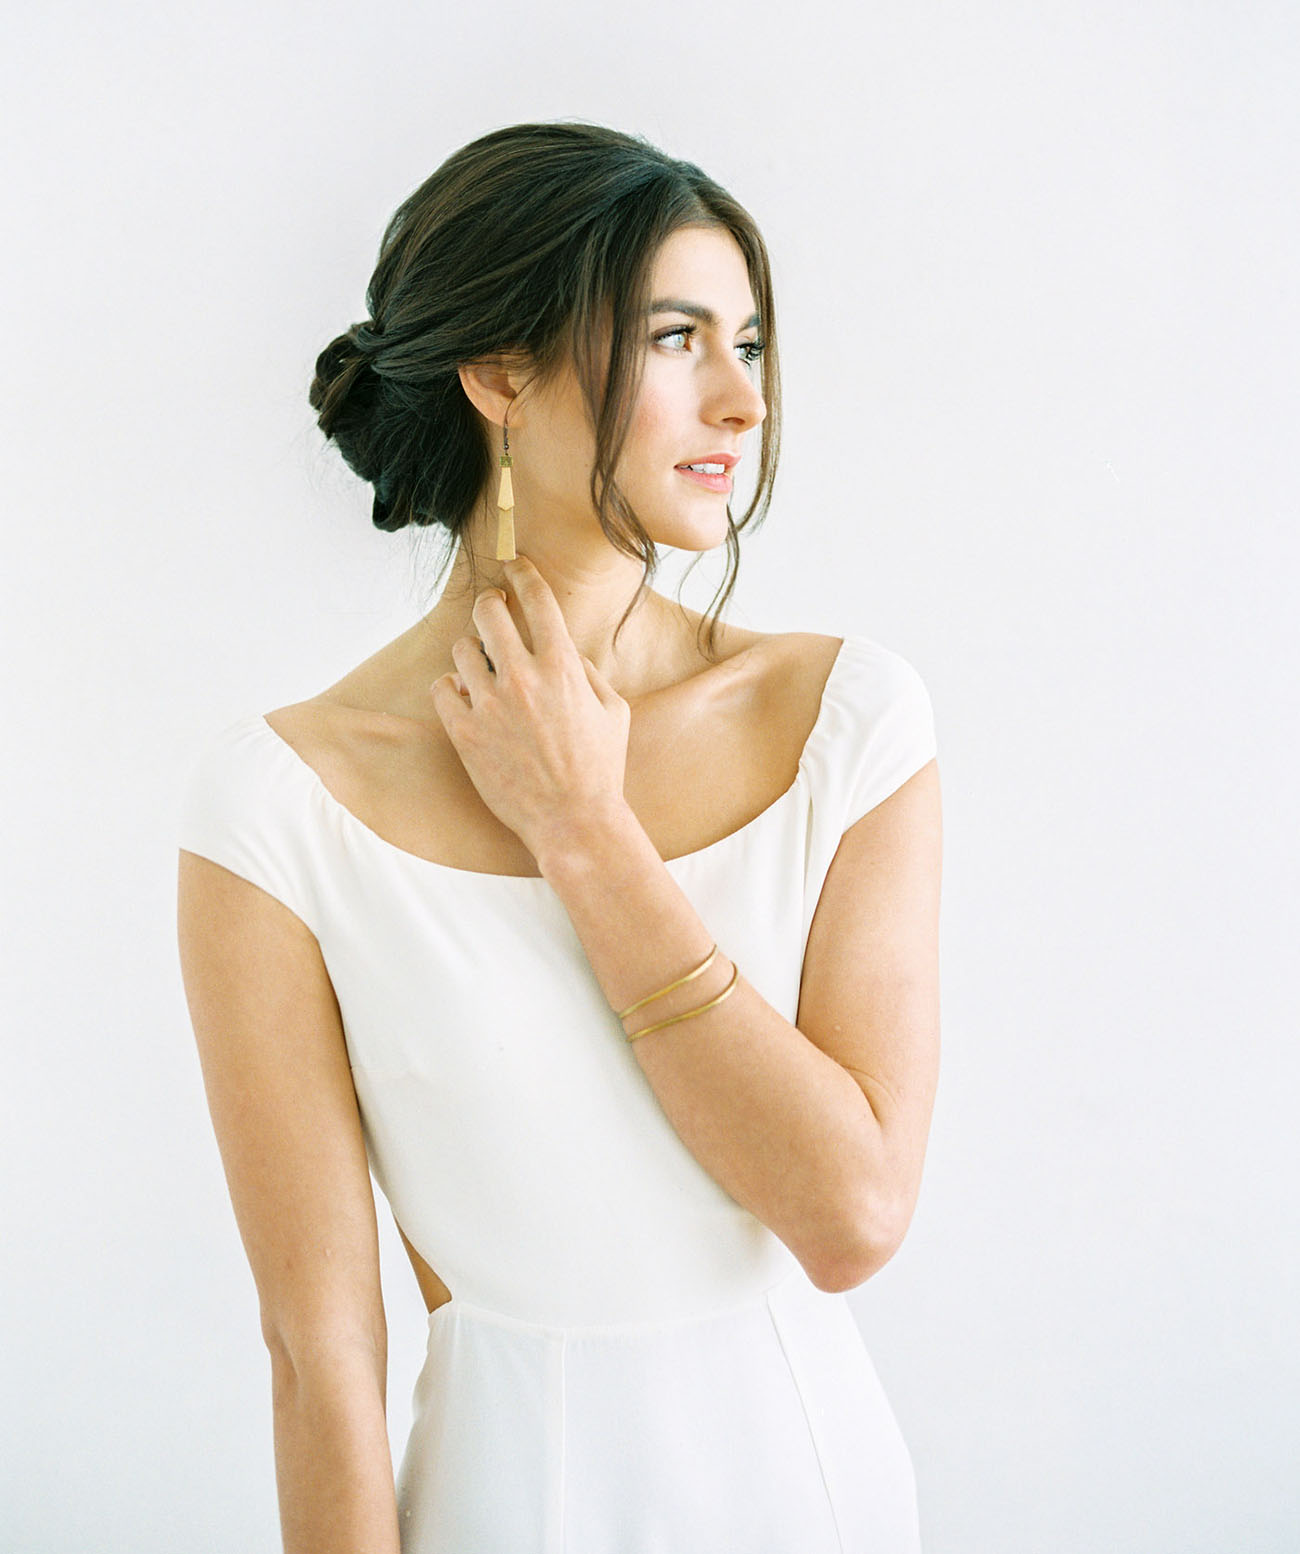 A low twisted bun hairstyle with a sleek top and some bangs is a chic and refined idea for a minimalist wedding